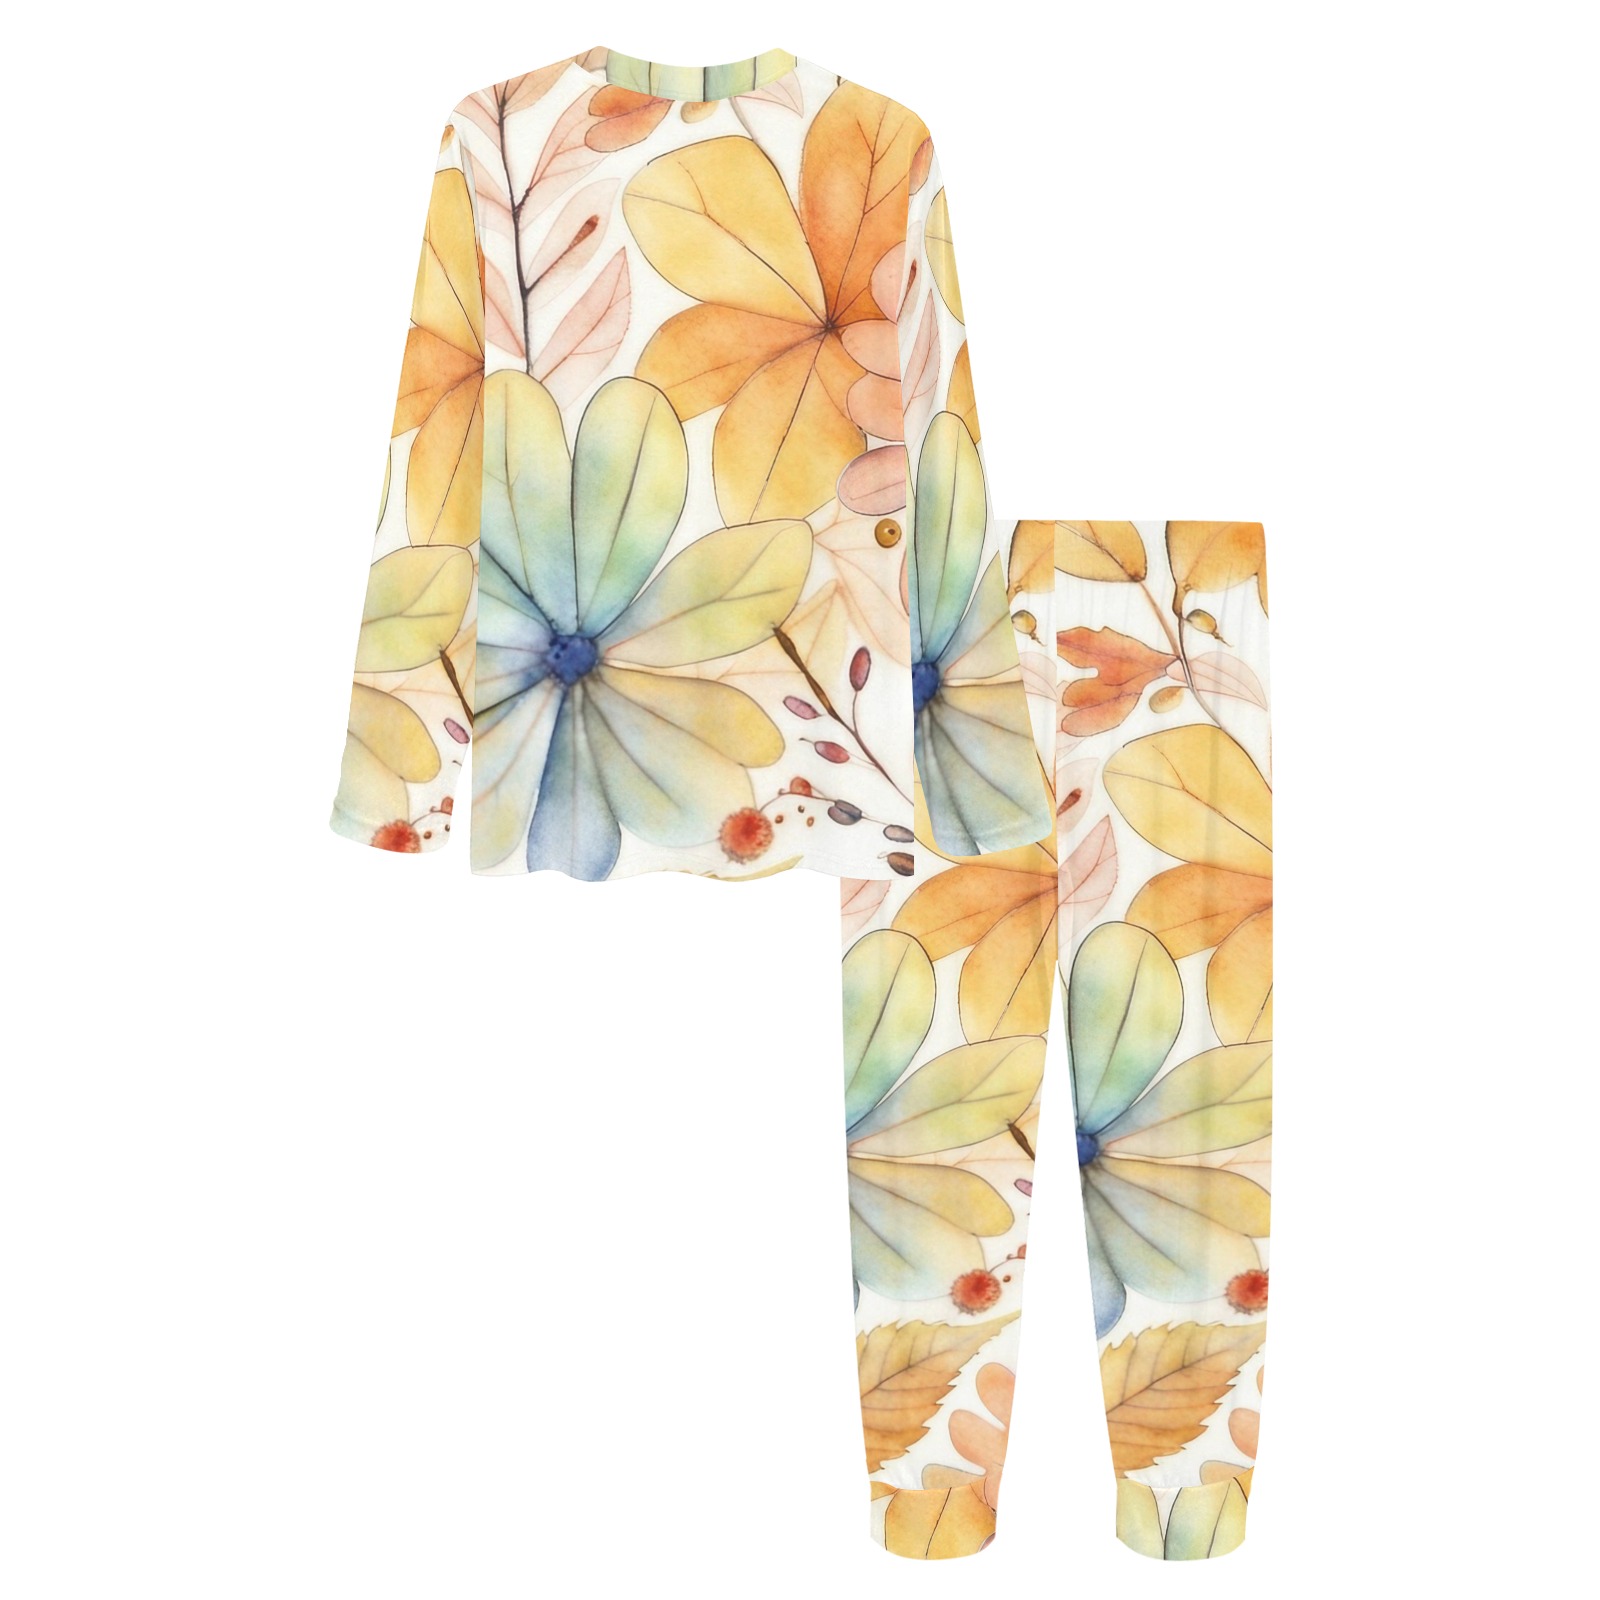 Watercolor Floral 2 Women's All Over Print Pajama Set